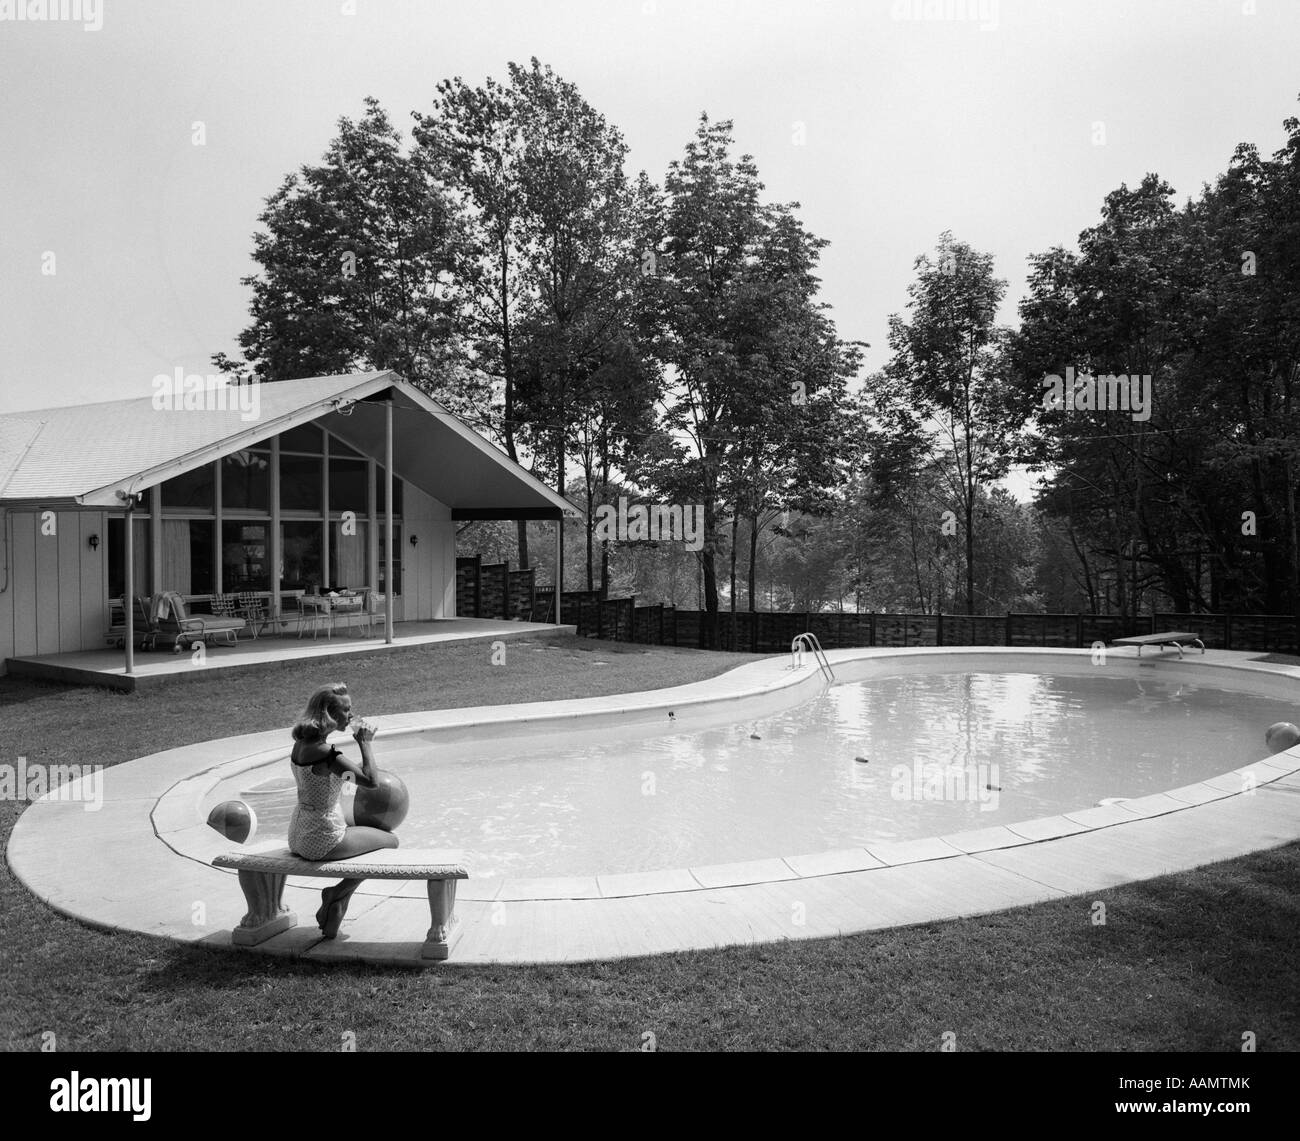 1960s BLOND IN BATHING SUIT SITTING ON STONE BENCH AT END OF KIDNEY-SHAPED POOL Stock Photo